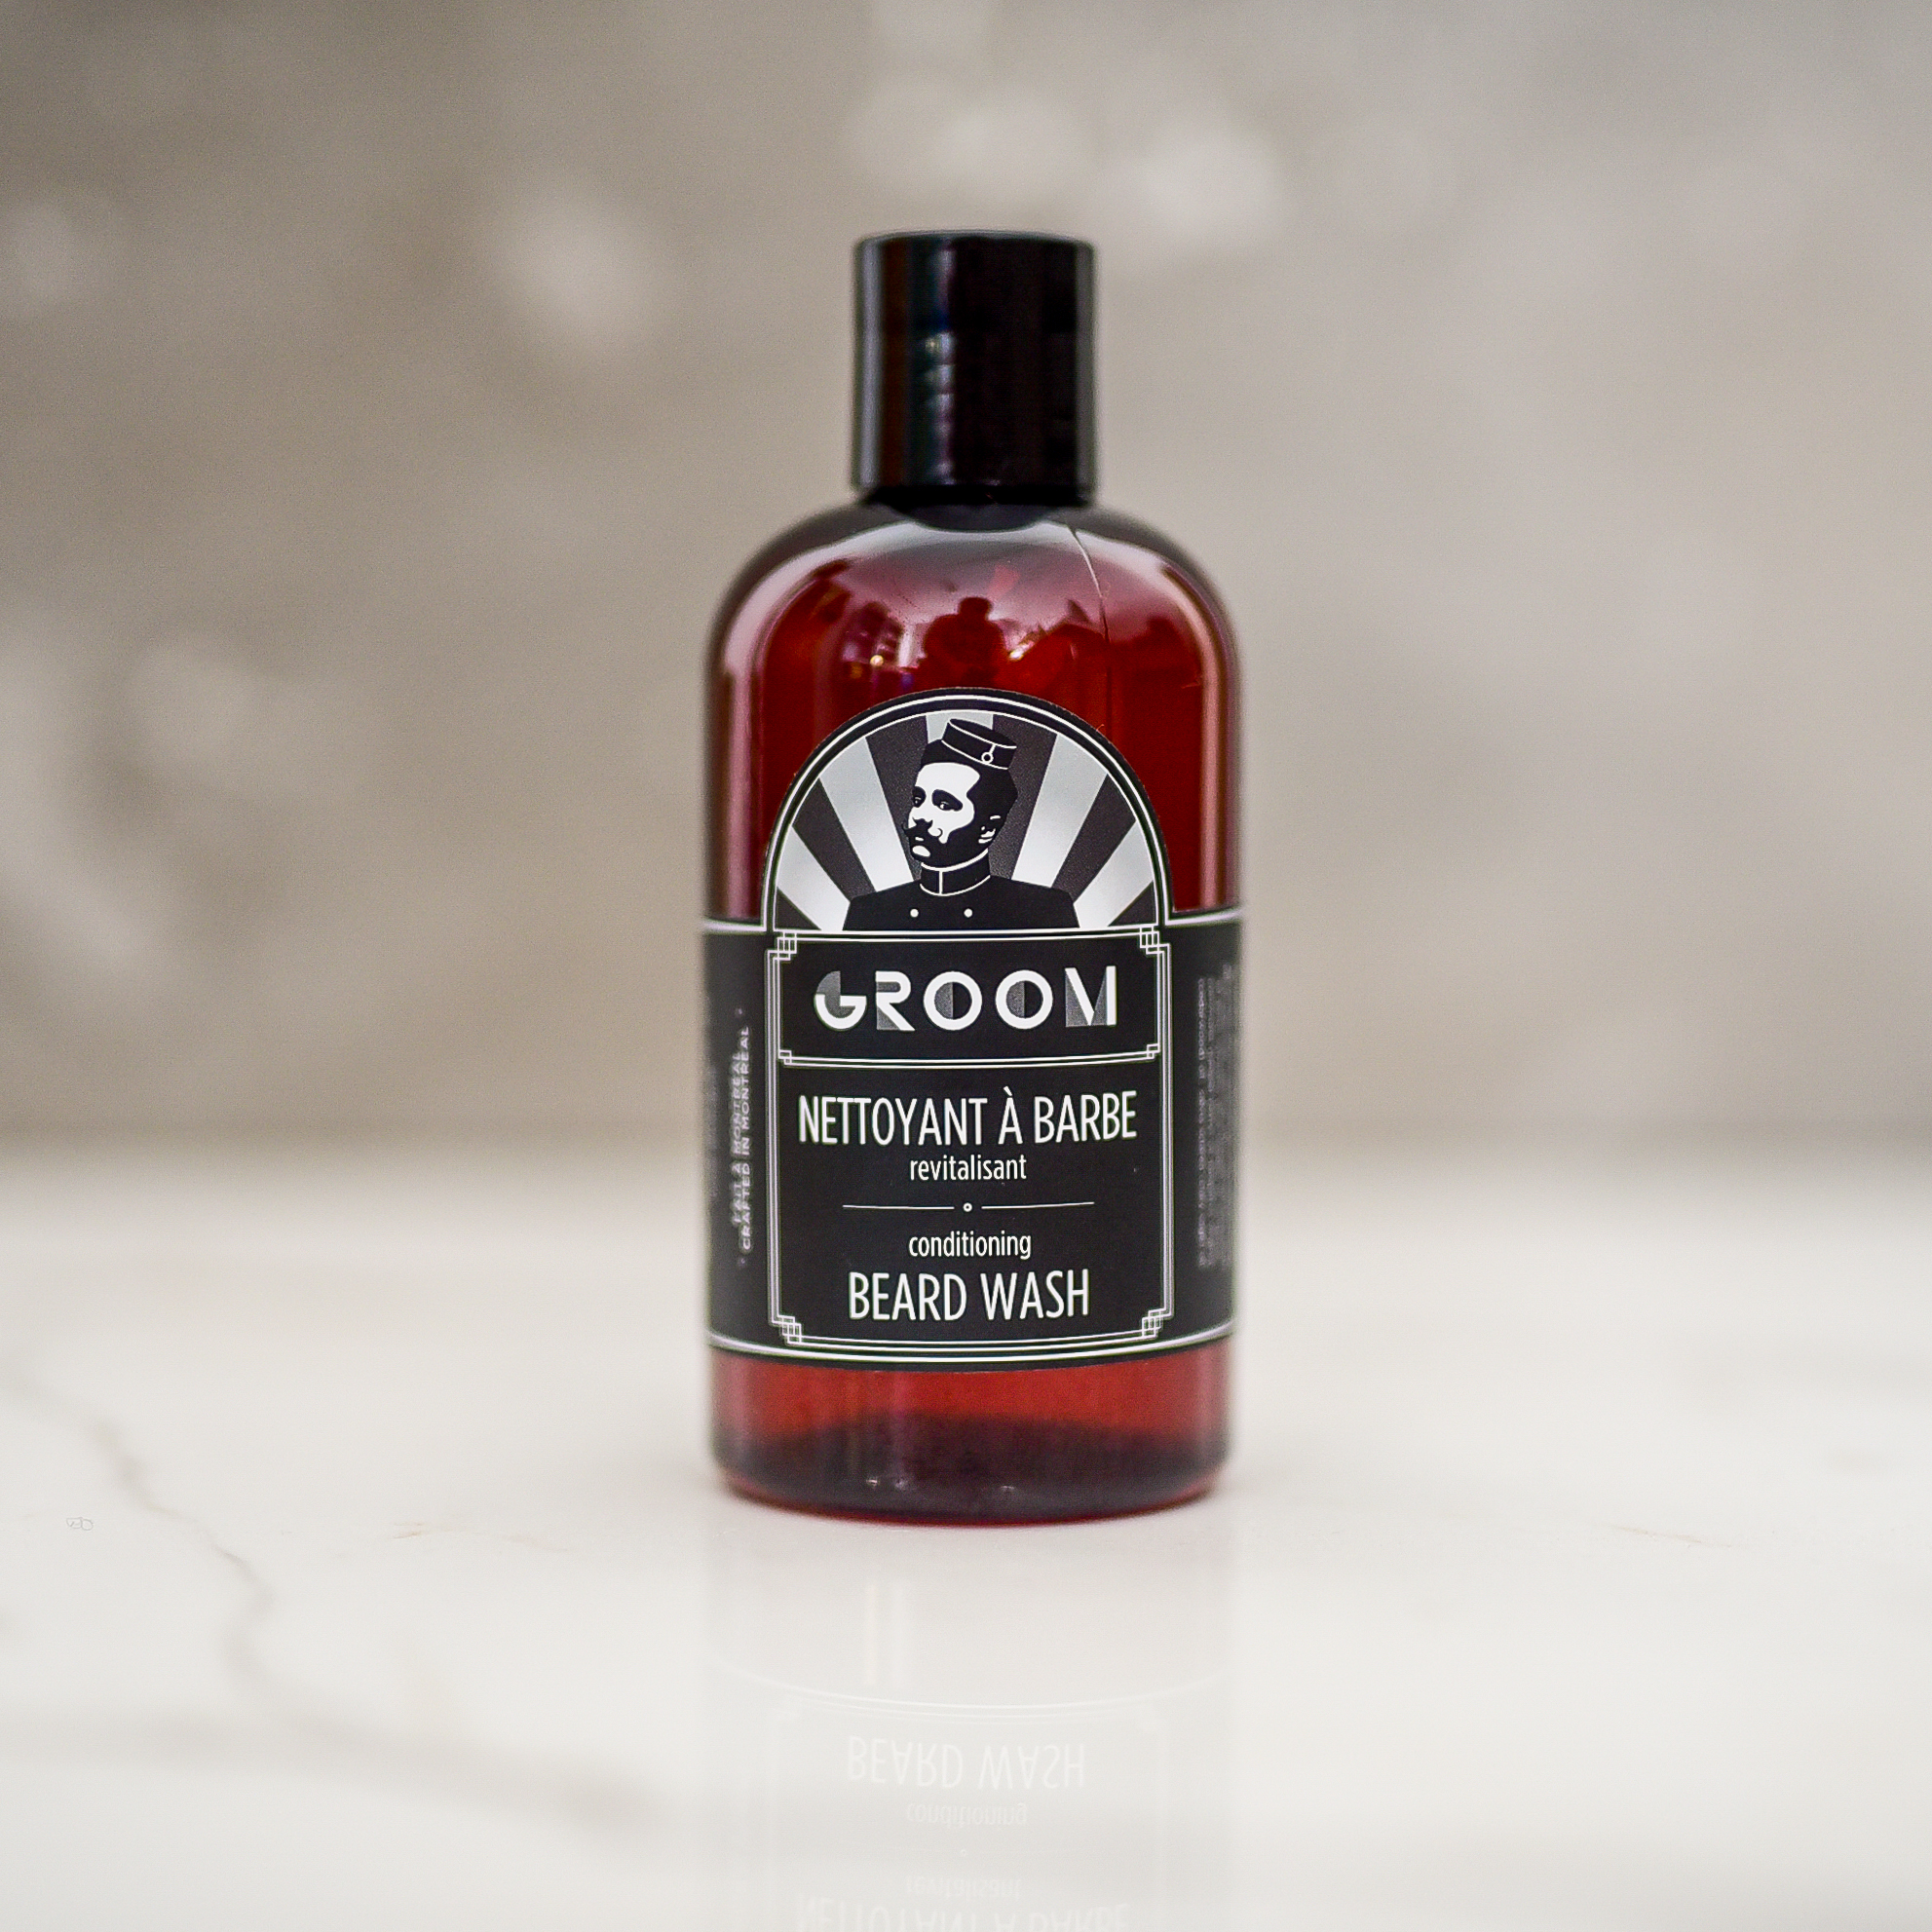 BEARD WASH BY GROOM - GROOMING GIFT IDEAS - THE ULTIMATE GIFT LIST FOR MODERN MEN